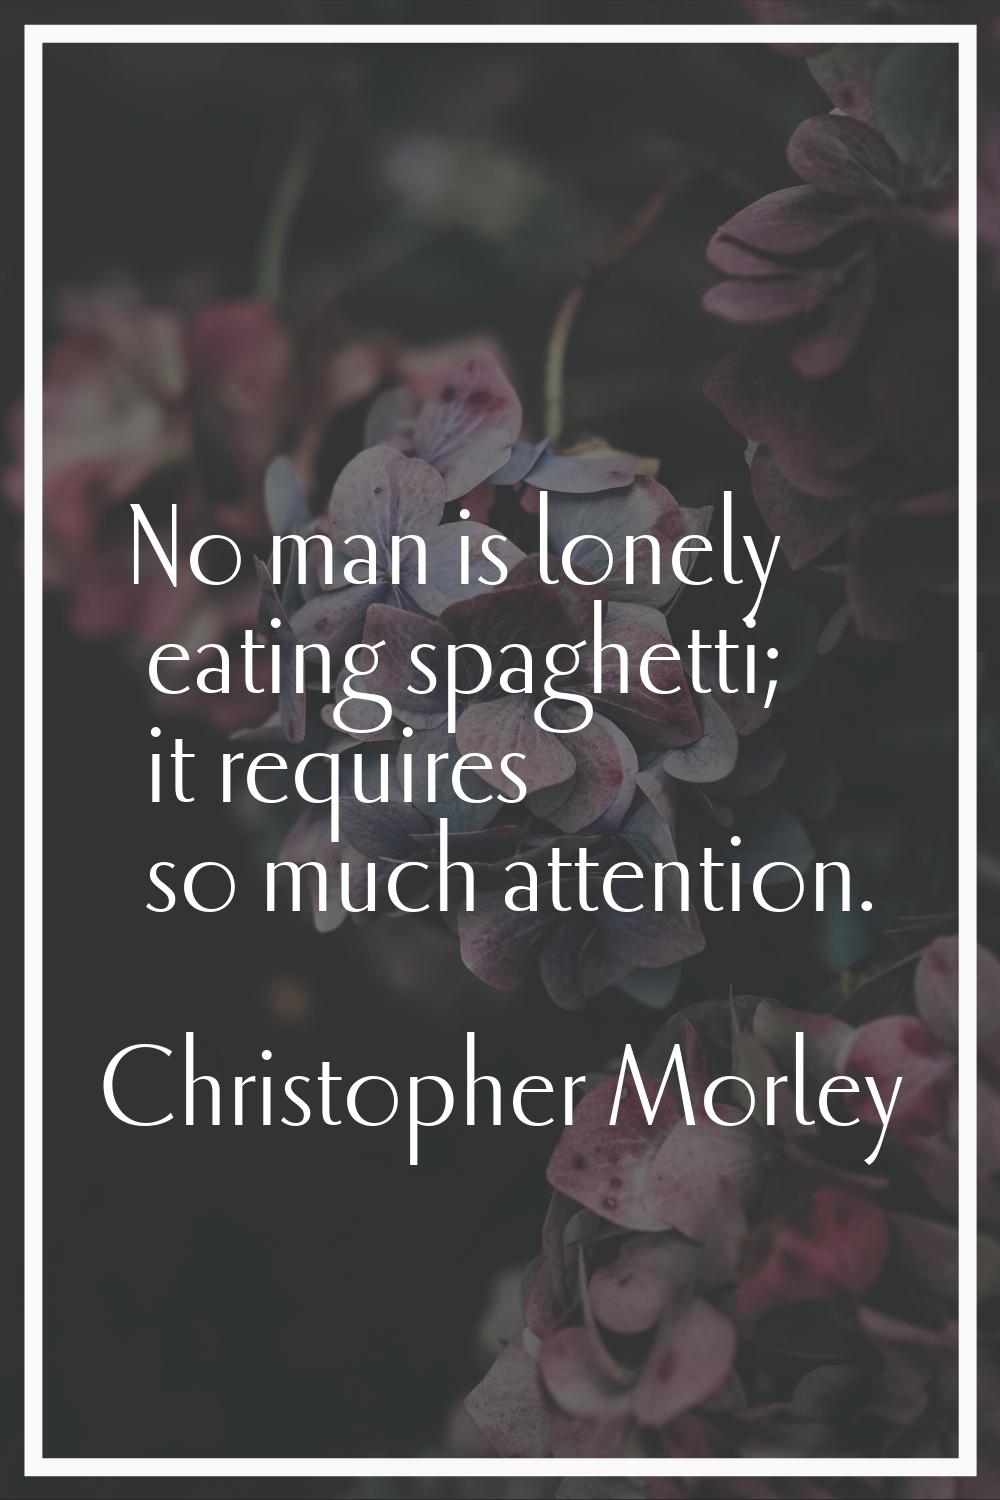 No man is lonely eating spaghetti; it requires so much attention.